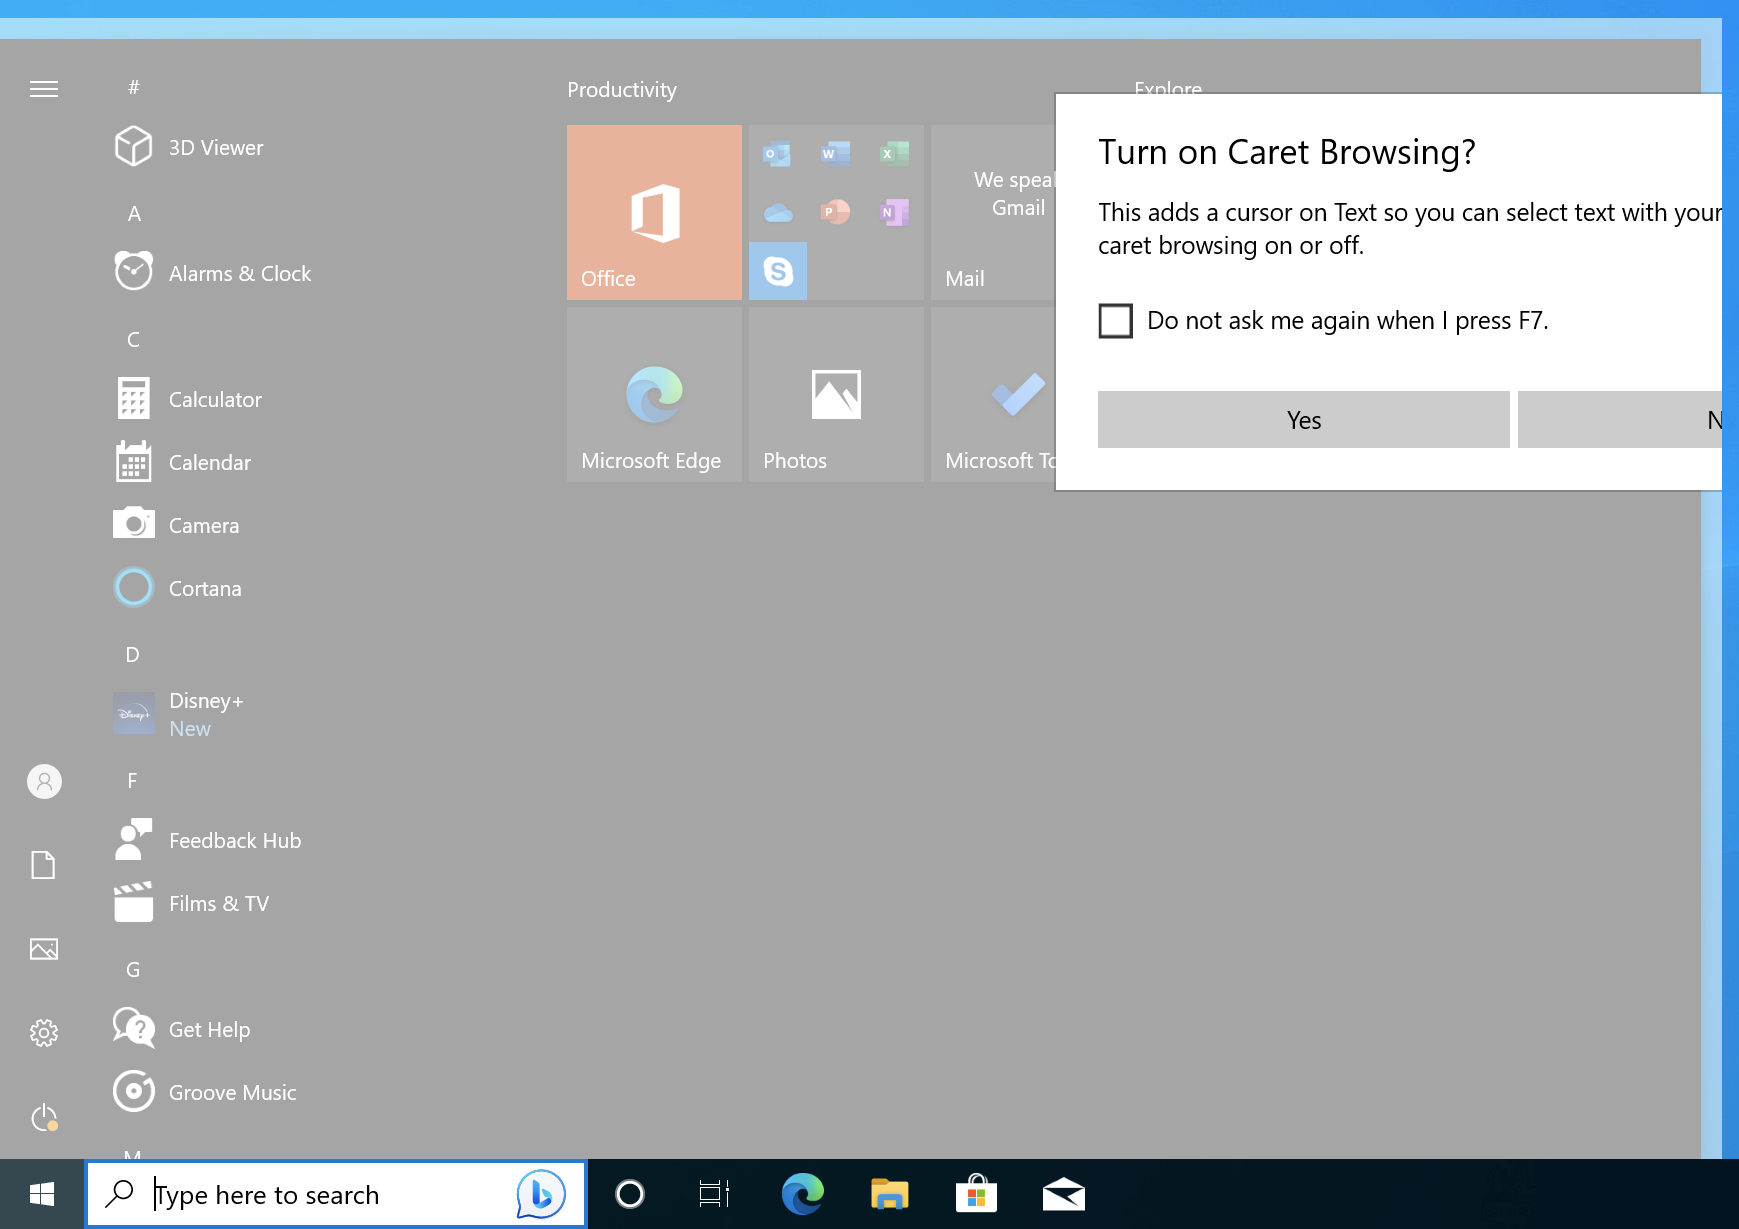 A wider start menu, with a partly visible caret browsing dialogue box on top.